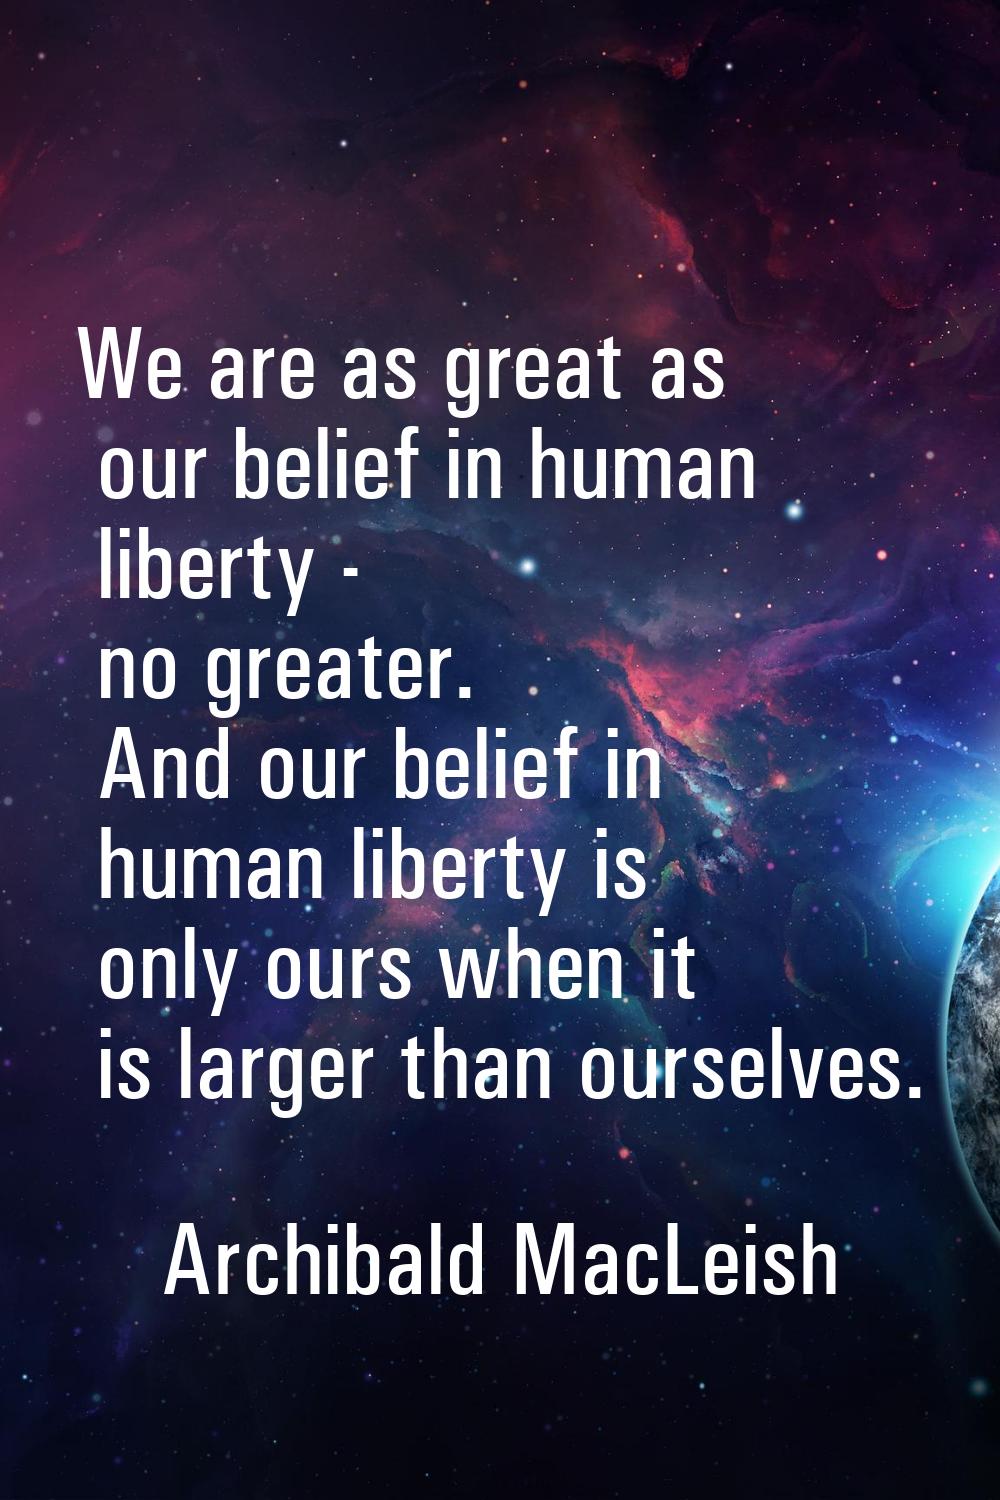 We are as great as our belief in human liberty - no greater. And our belief in human liberty is onl